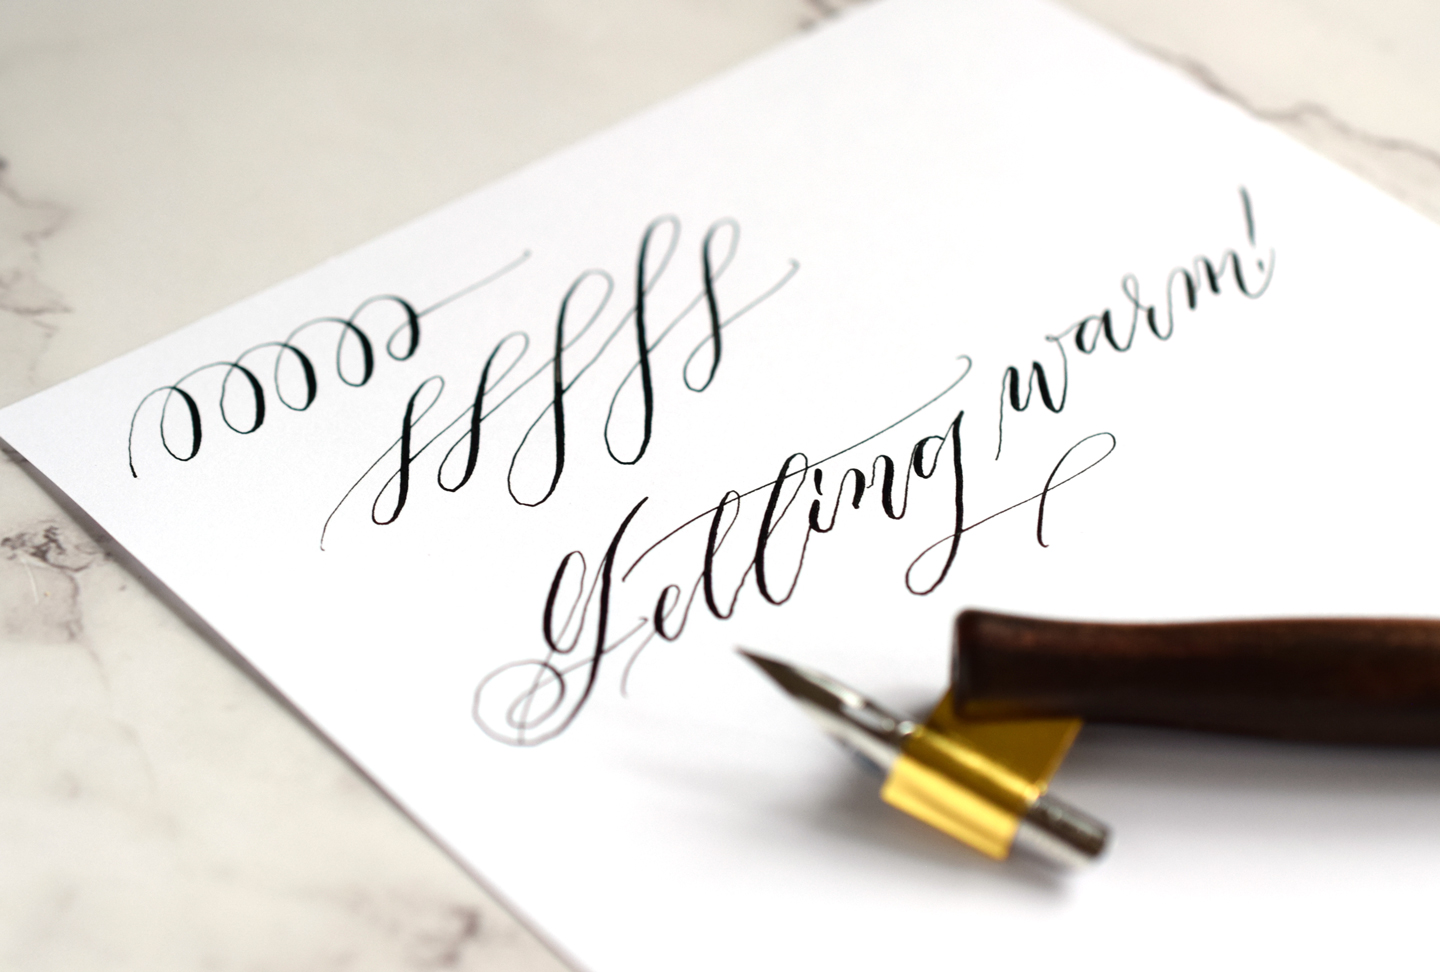 Shaky Calligraphy Strokes: Causes, Solutions, and a Free Warm Up Worksheet